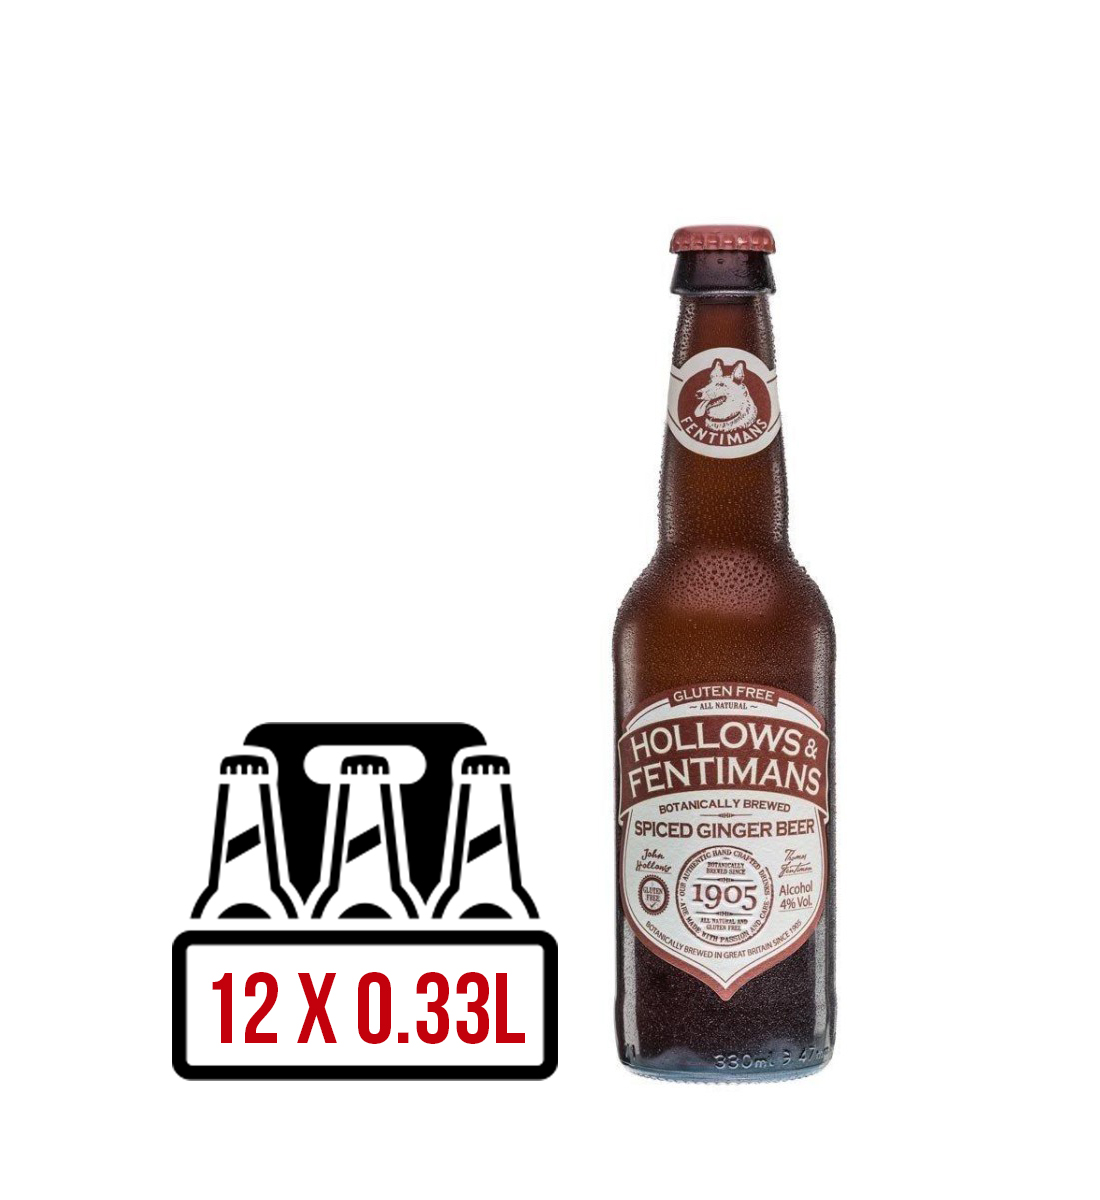 Hollows & Fentimans Spiced Ginger Beer BAX 12 st. x 0.33L